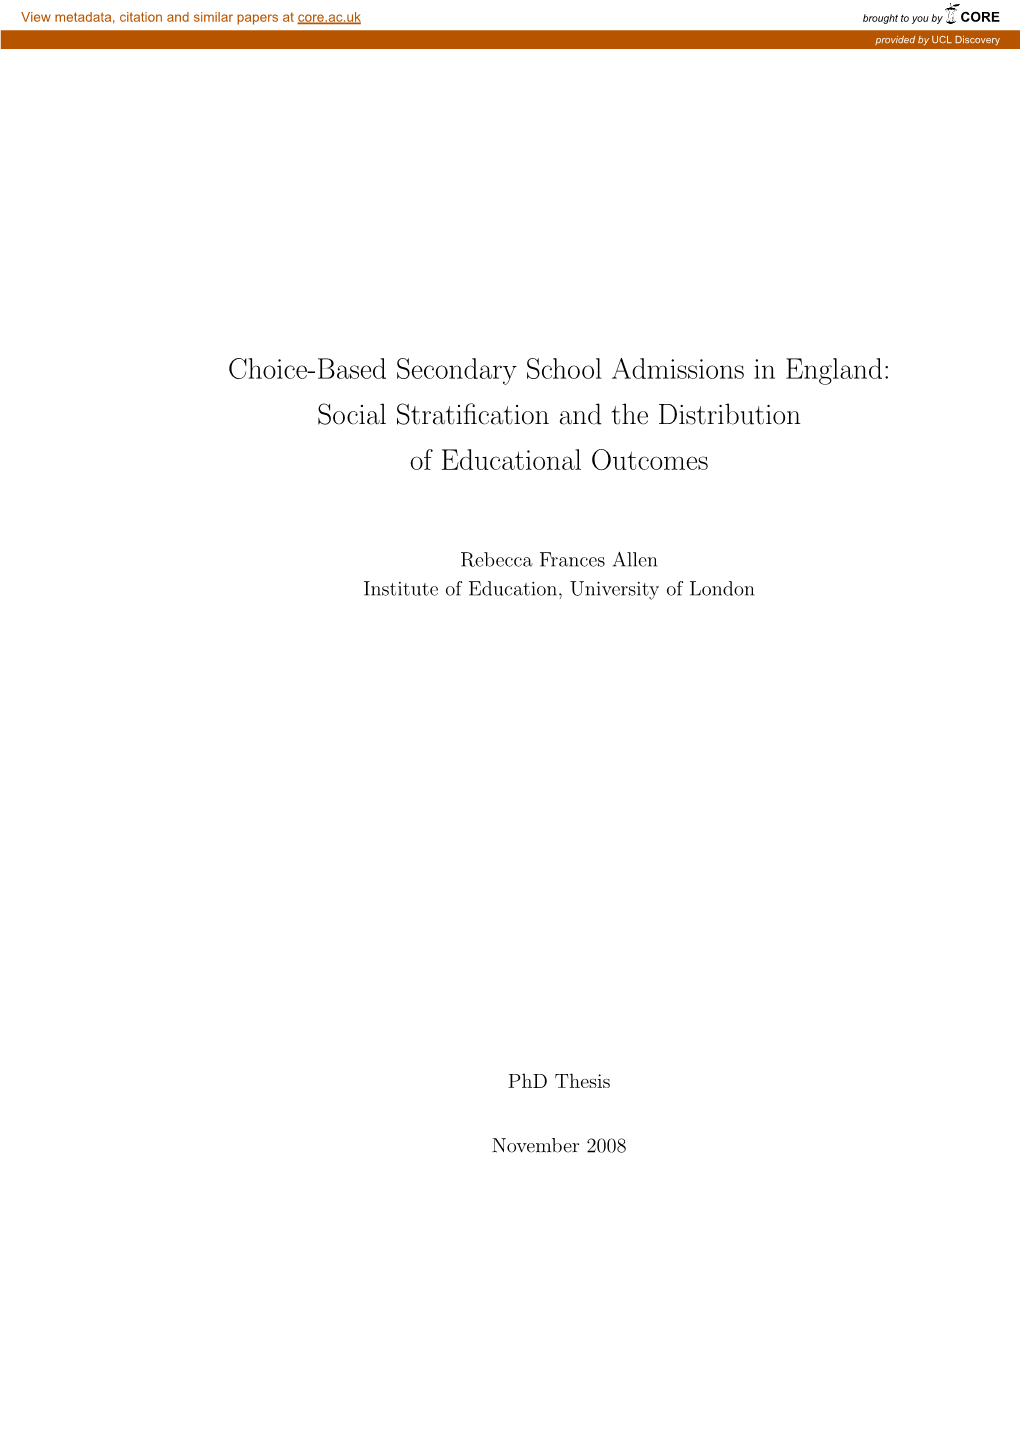 Choice-Based Secondary School Admissions in England: Social Stratiﬁcation and the Distribution of Educational Outcomes